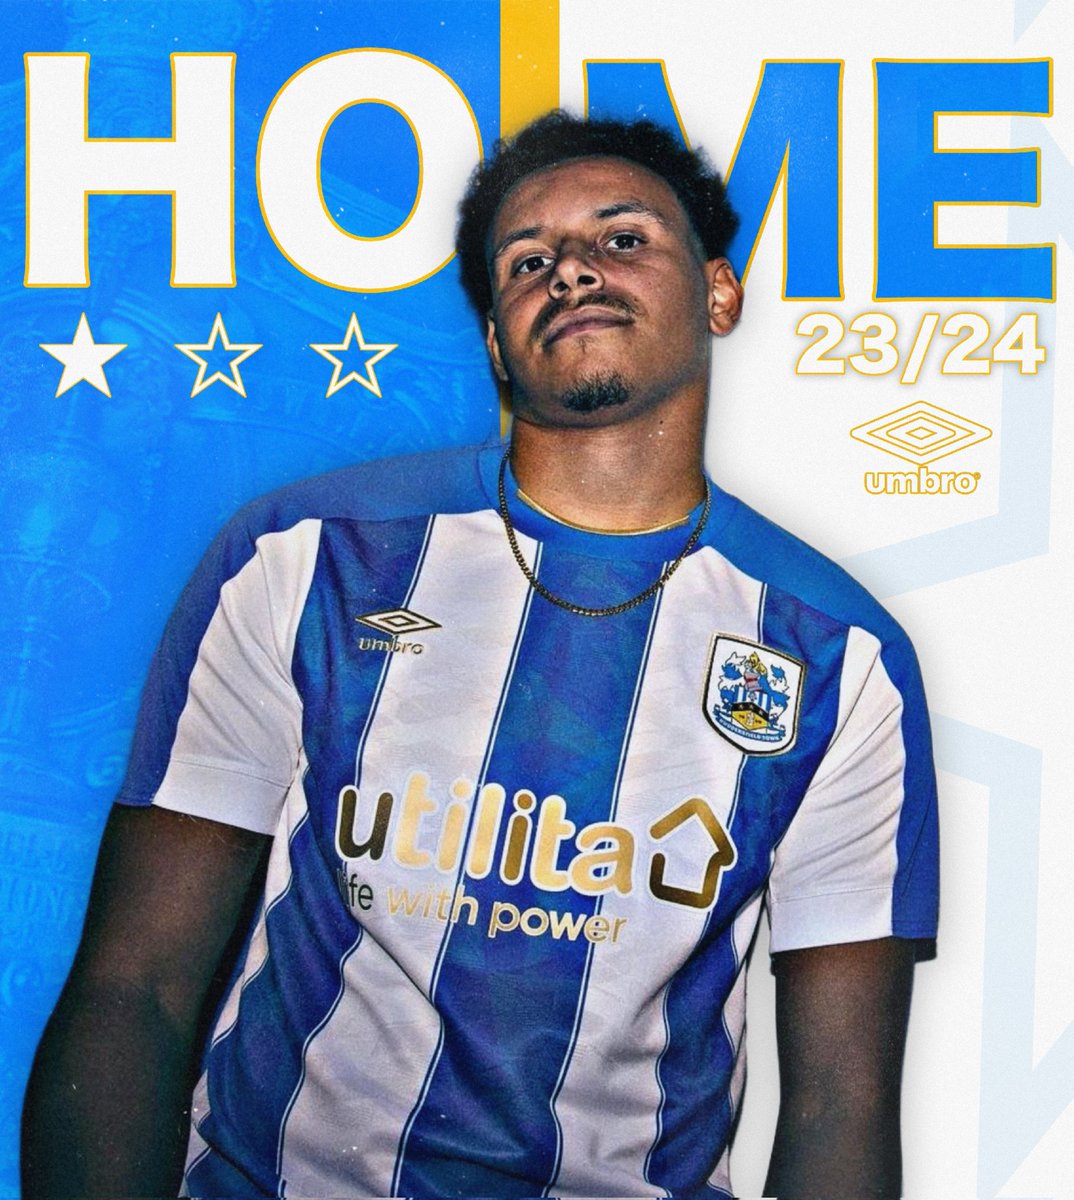 𝑷𝑹𝑶𝑼𝑫 𝑯𝑰𝑺𝑻𝑶𝑹𝒀, 𝗕𝗥𝗜𝗚𝗛𝗧 𝗙𝗨𝗧𝗨𝗥𝗘.

Introducing the 2023/24 Home Kit 😍

#htafc | @umbro